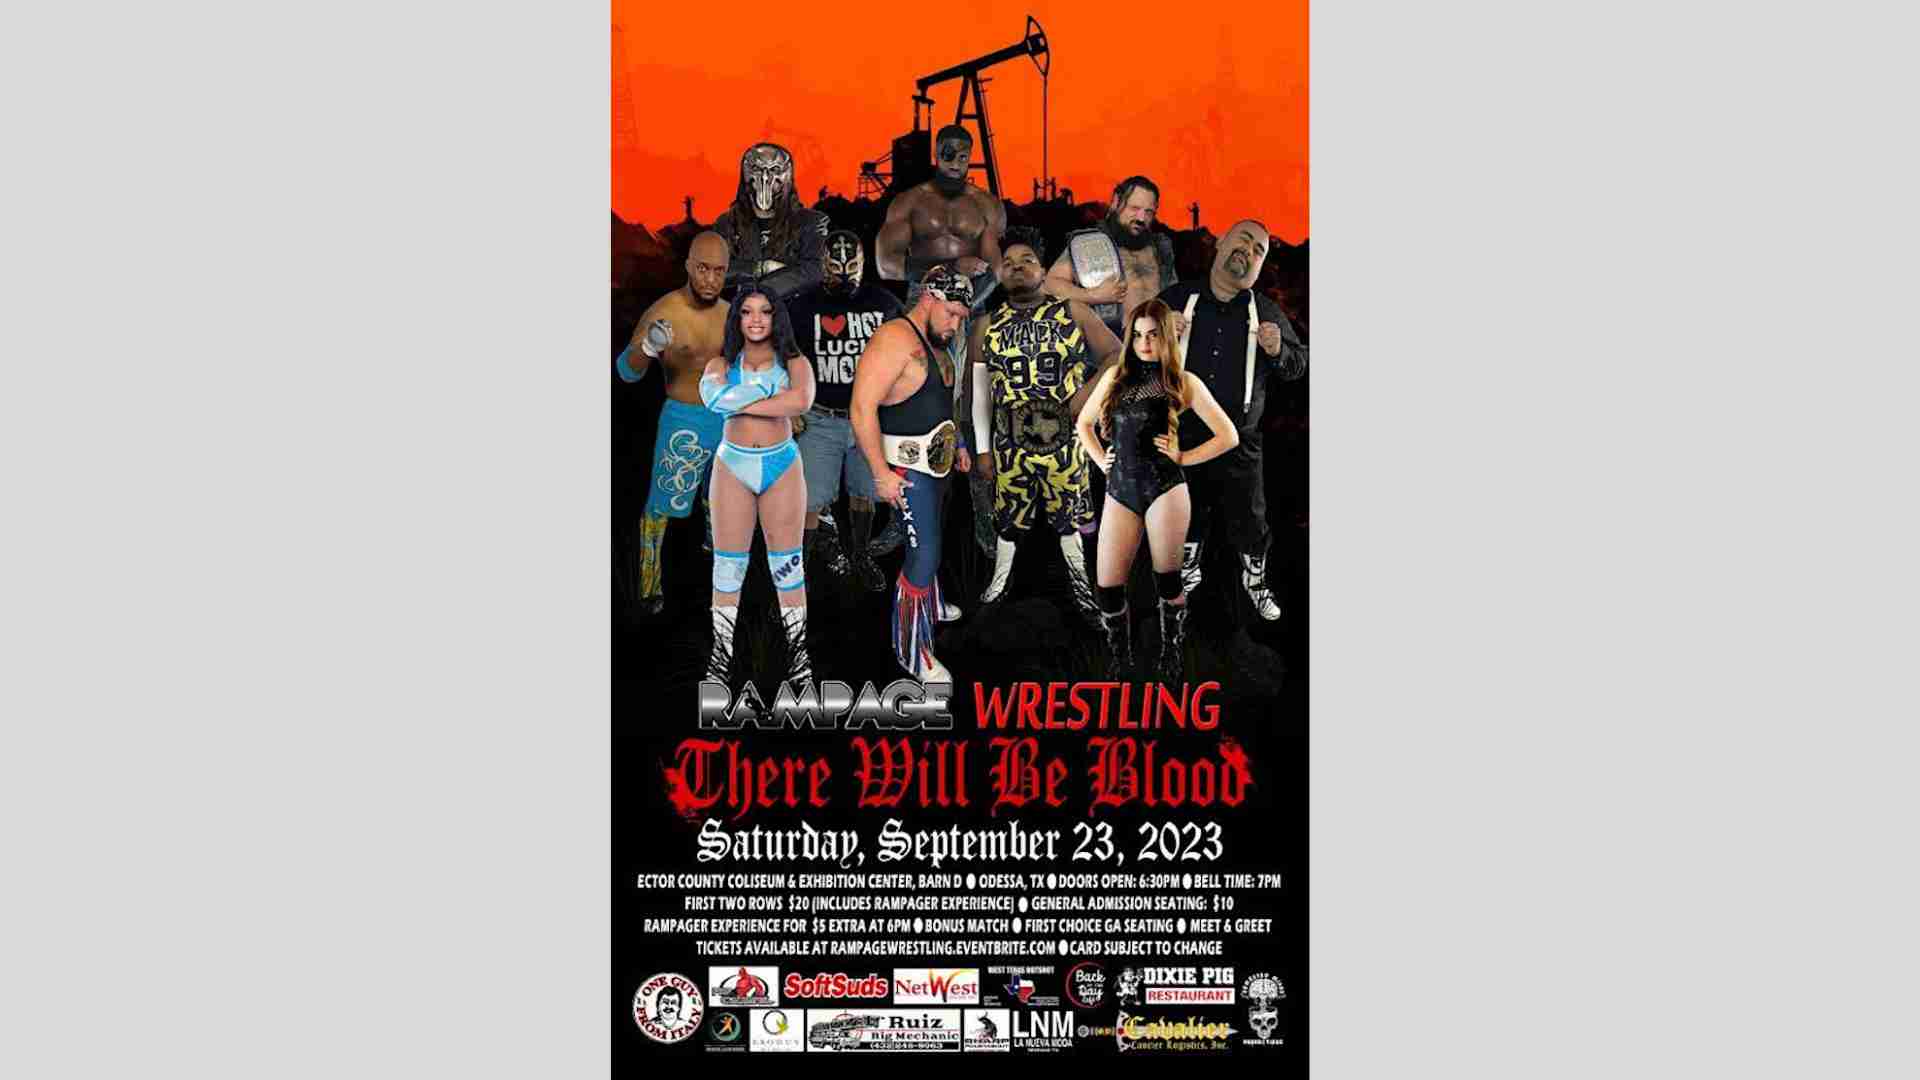 Rampage at The Ector County Coliseum on September 23, 2023 in Odessa, TX